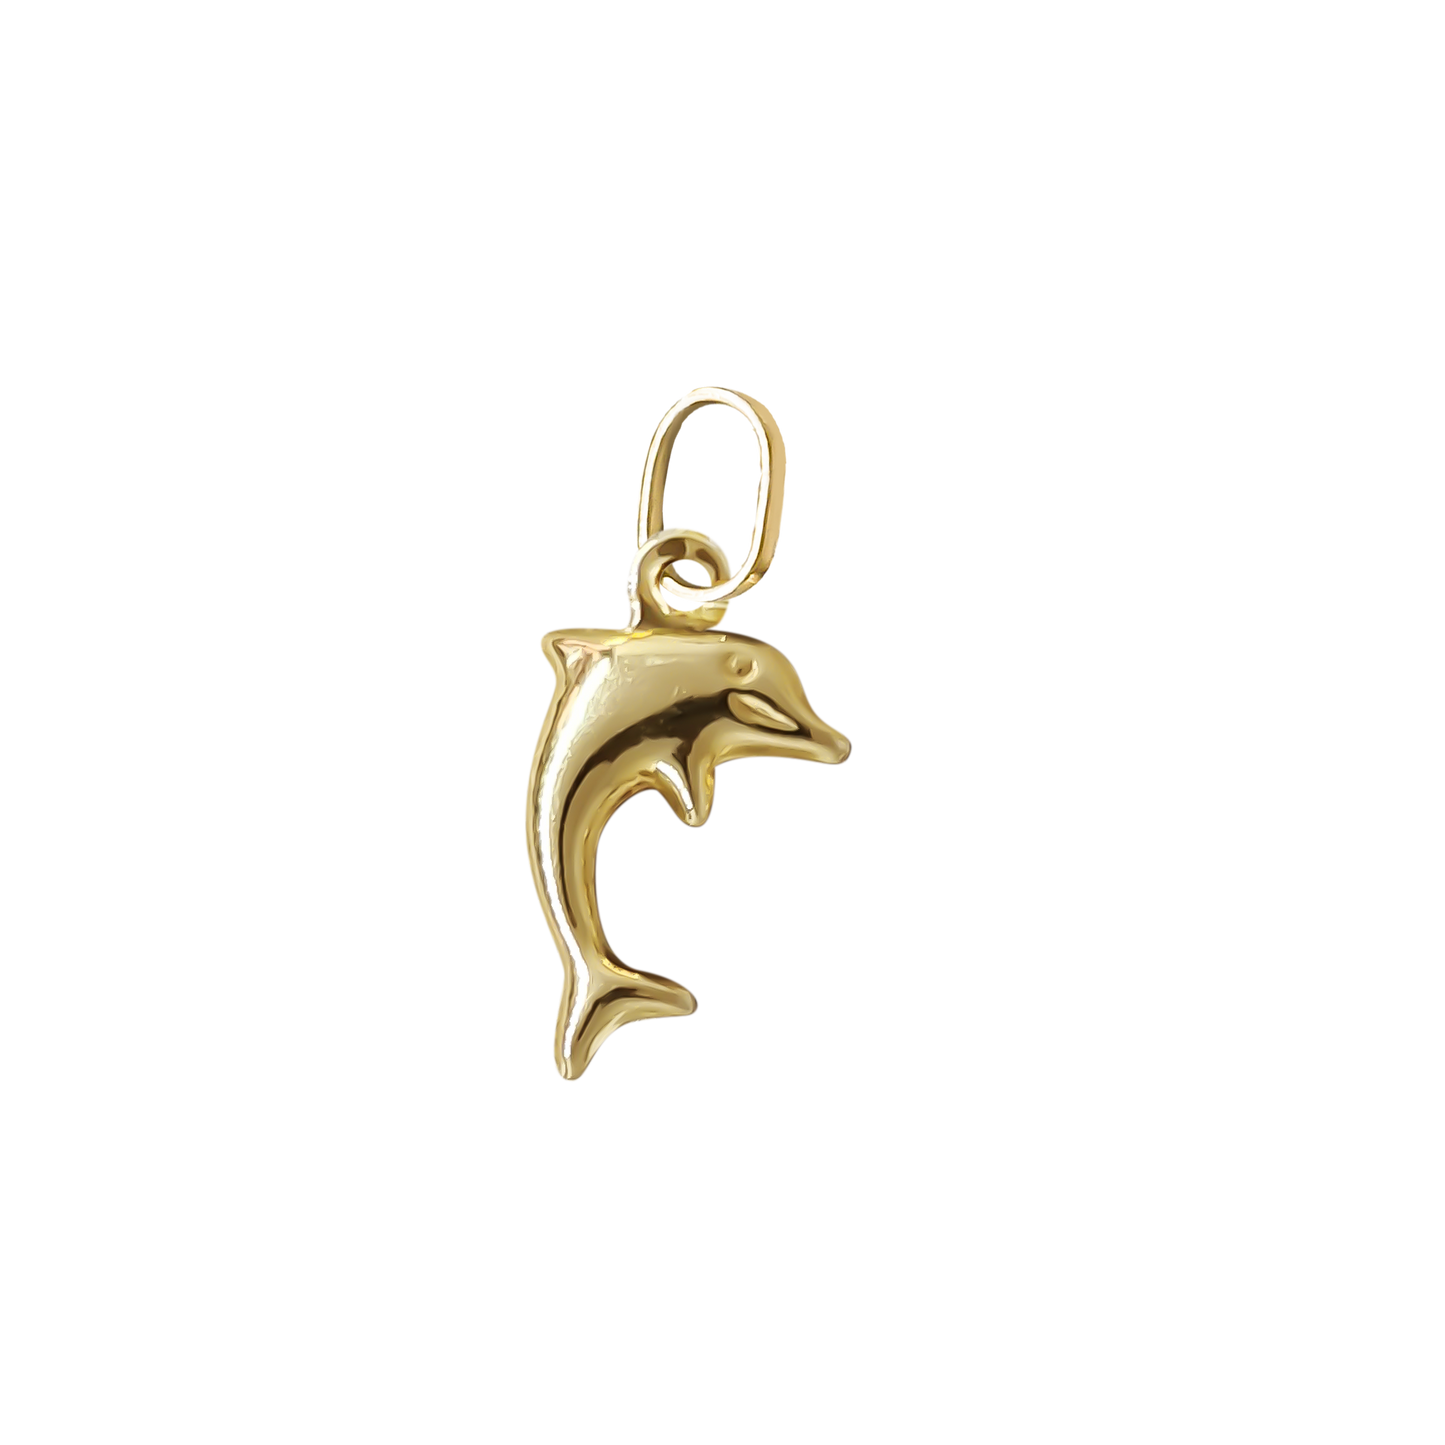 10mm Dolphin Charm 9ct Yellow Gold